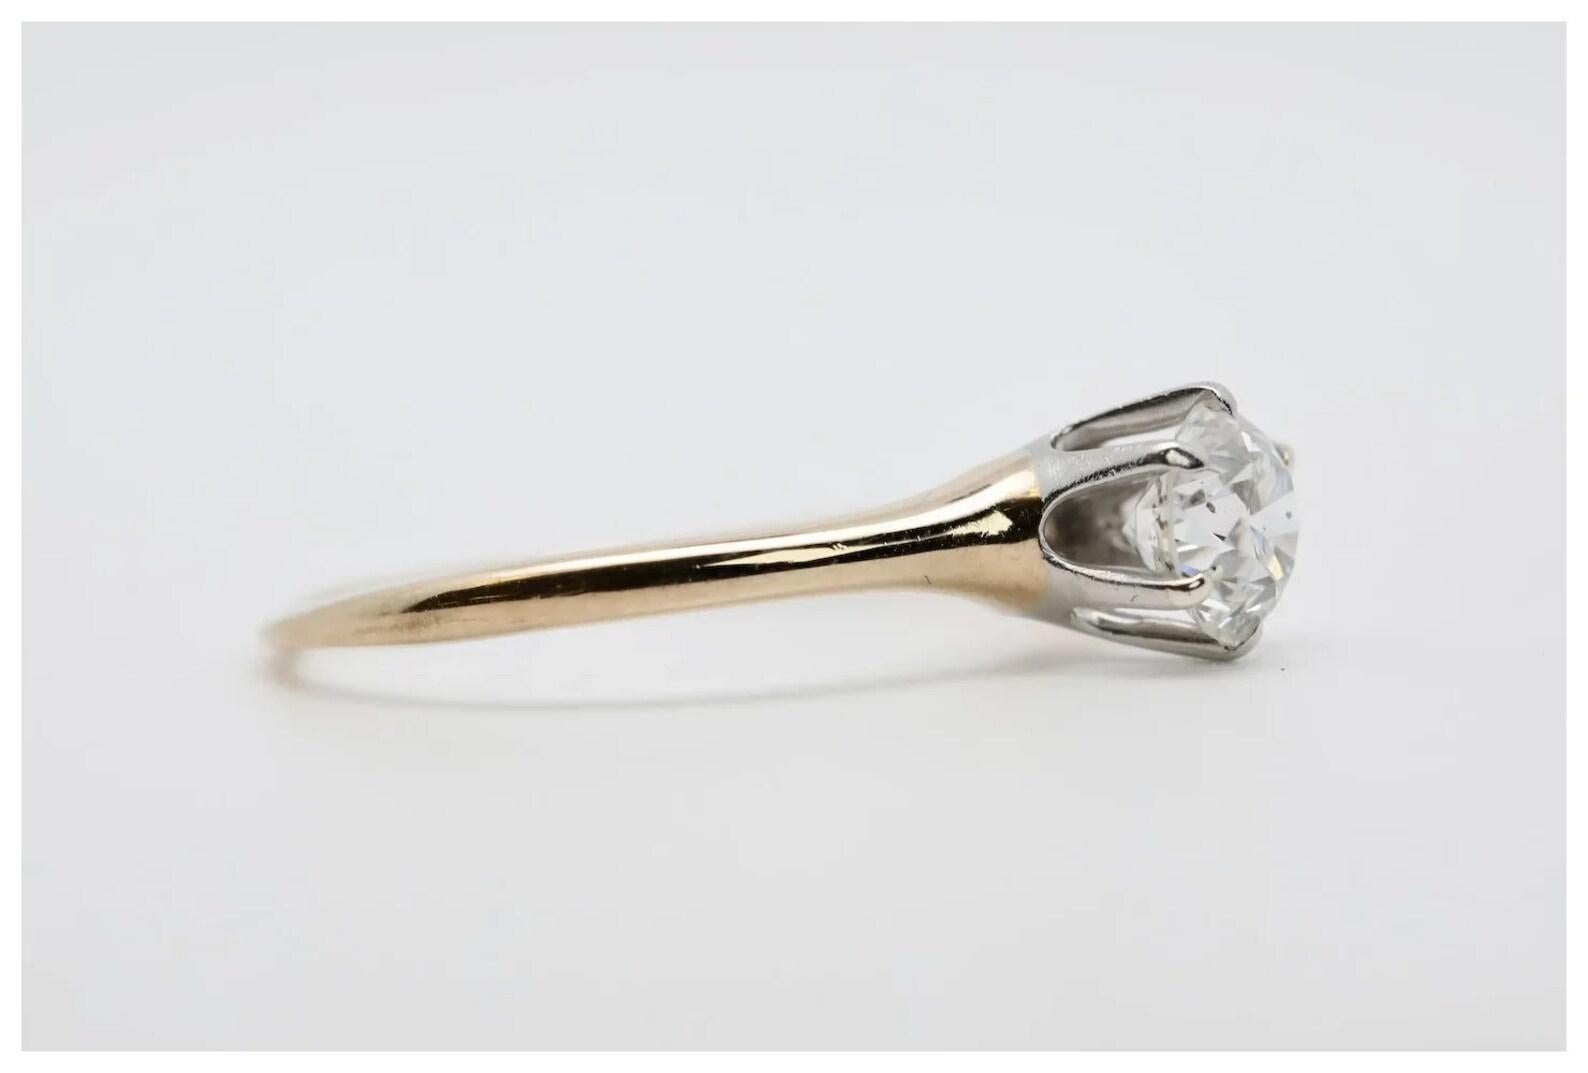 Edwardian 0.75ct Old European Cut Diamond Solitaire Engagement Ring In Good Condition For Sale In Boston, MA